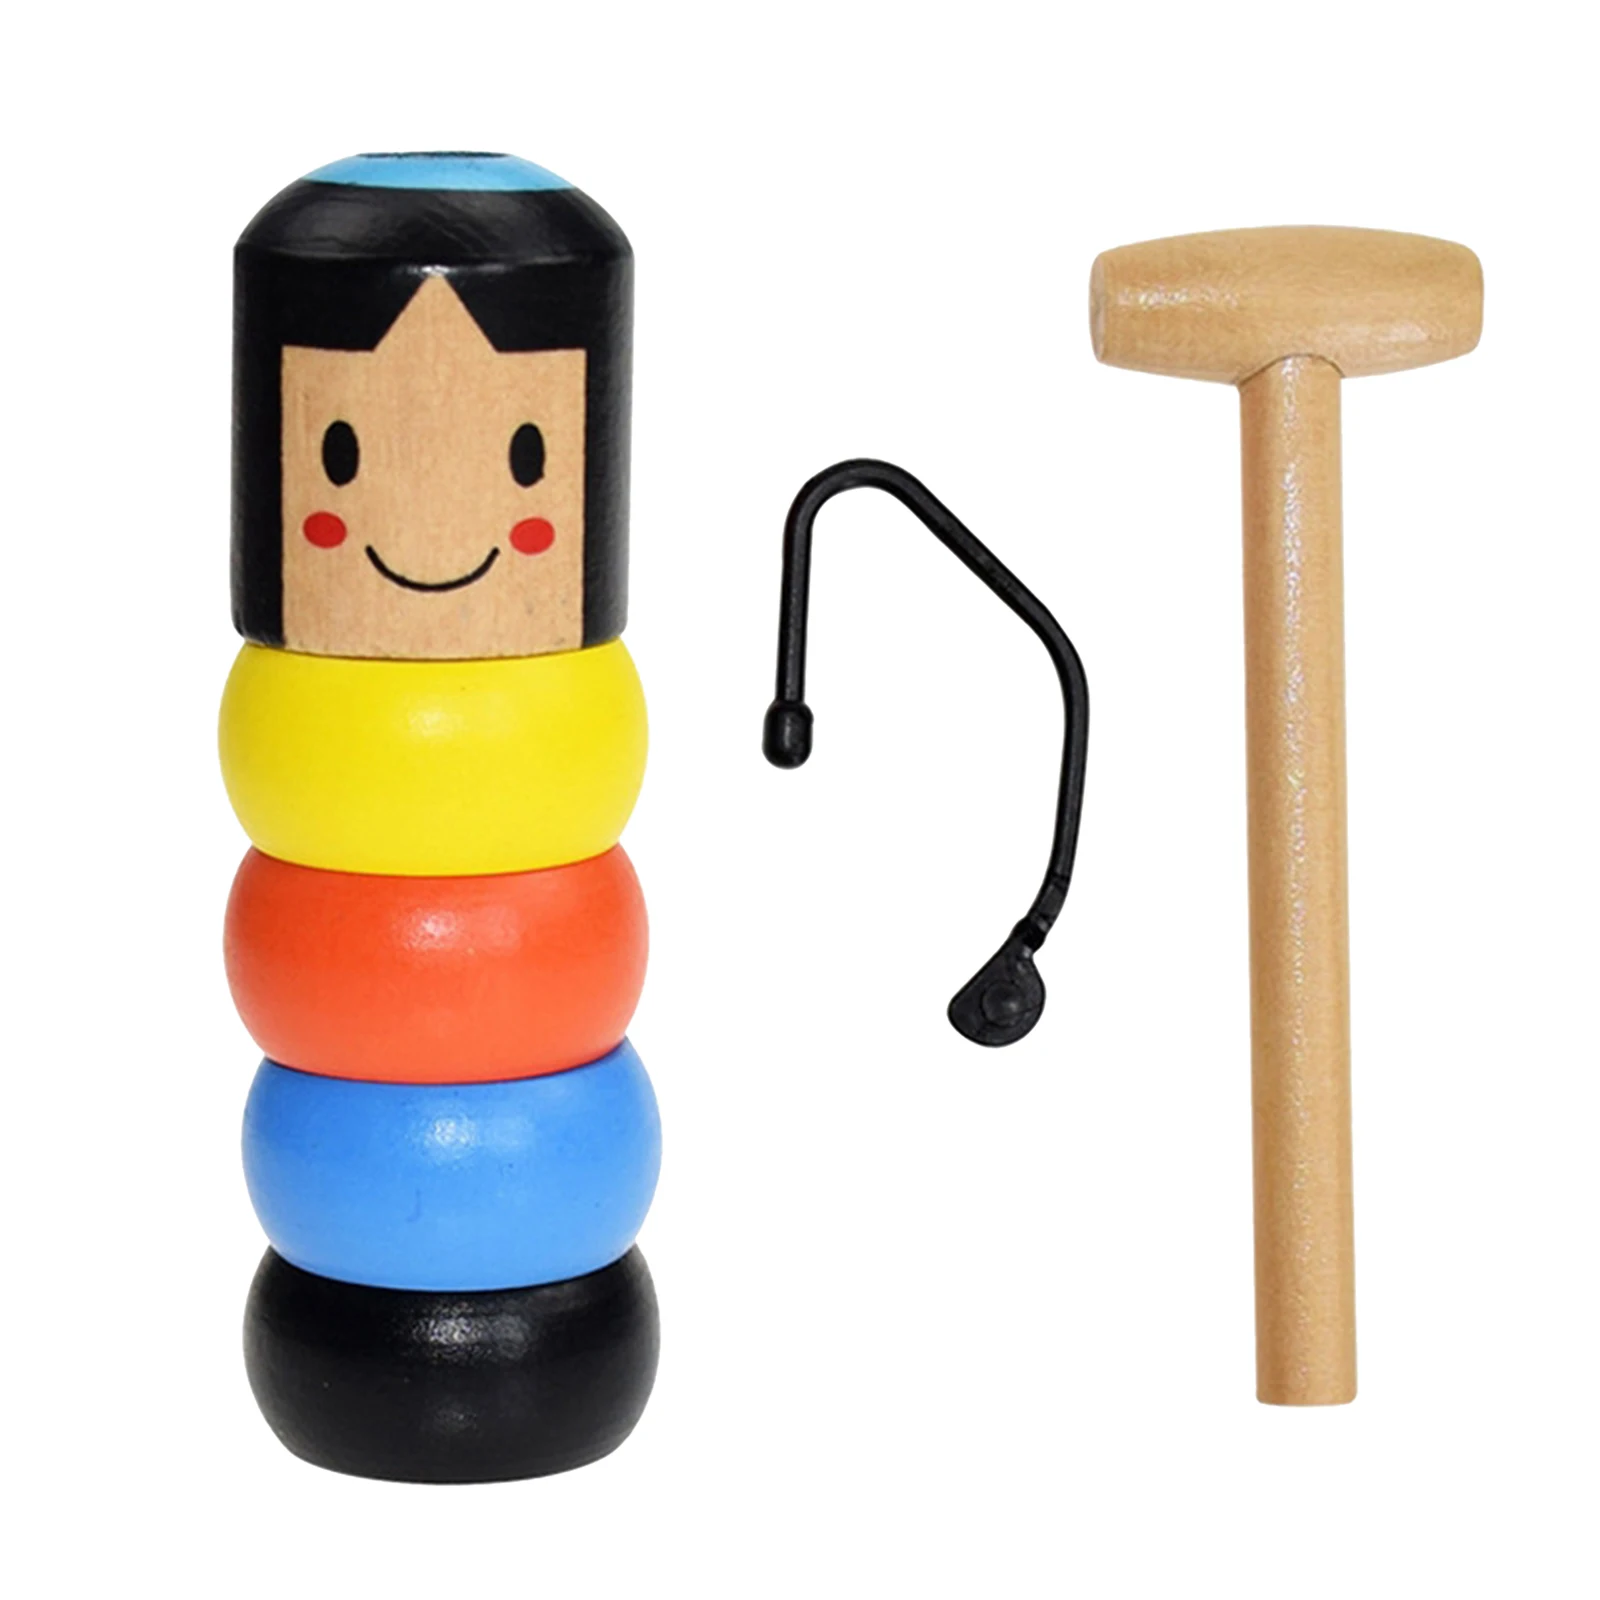 Stubborn Wood Man Toy Funny Unbreakable Magic Tricks Toys for Kids